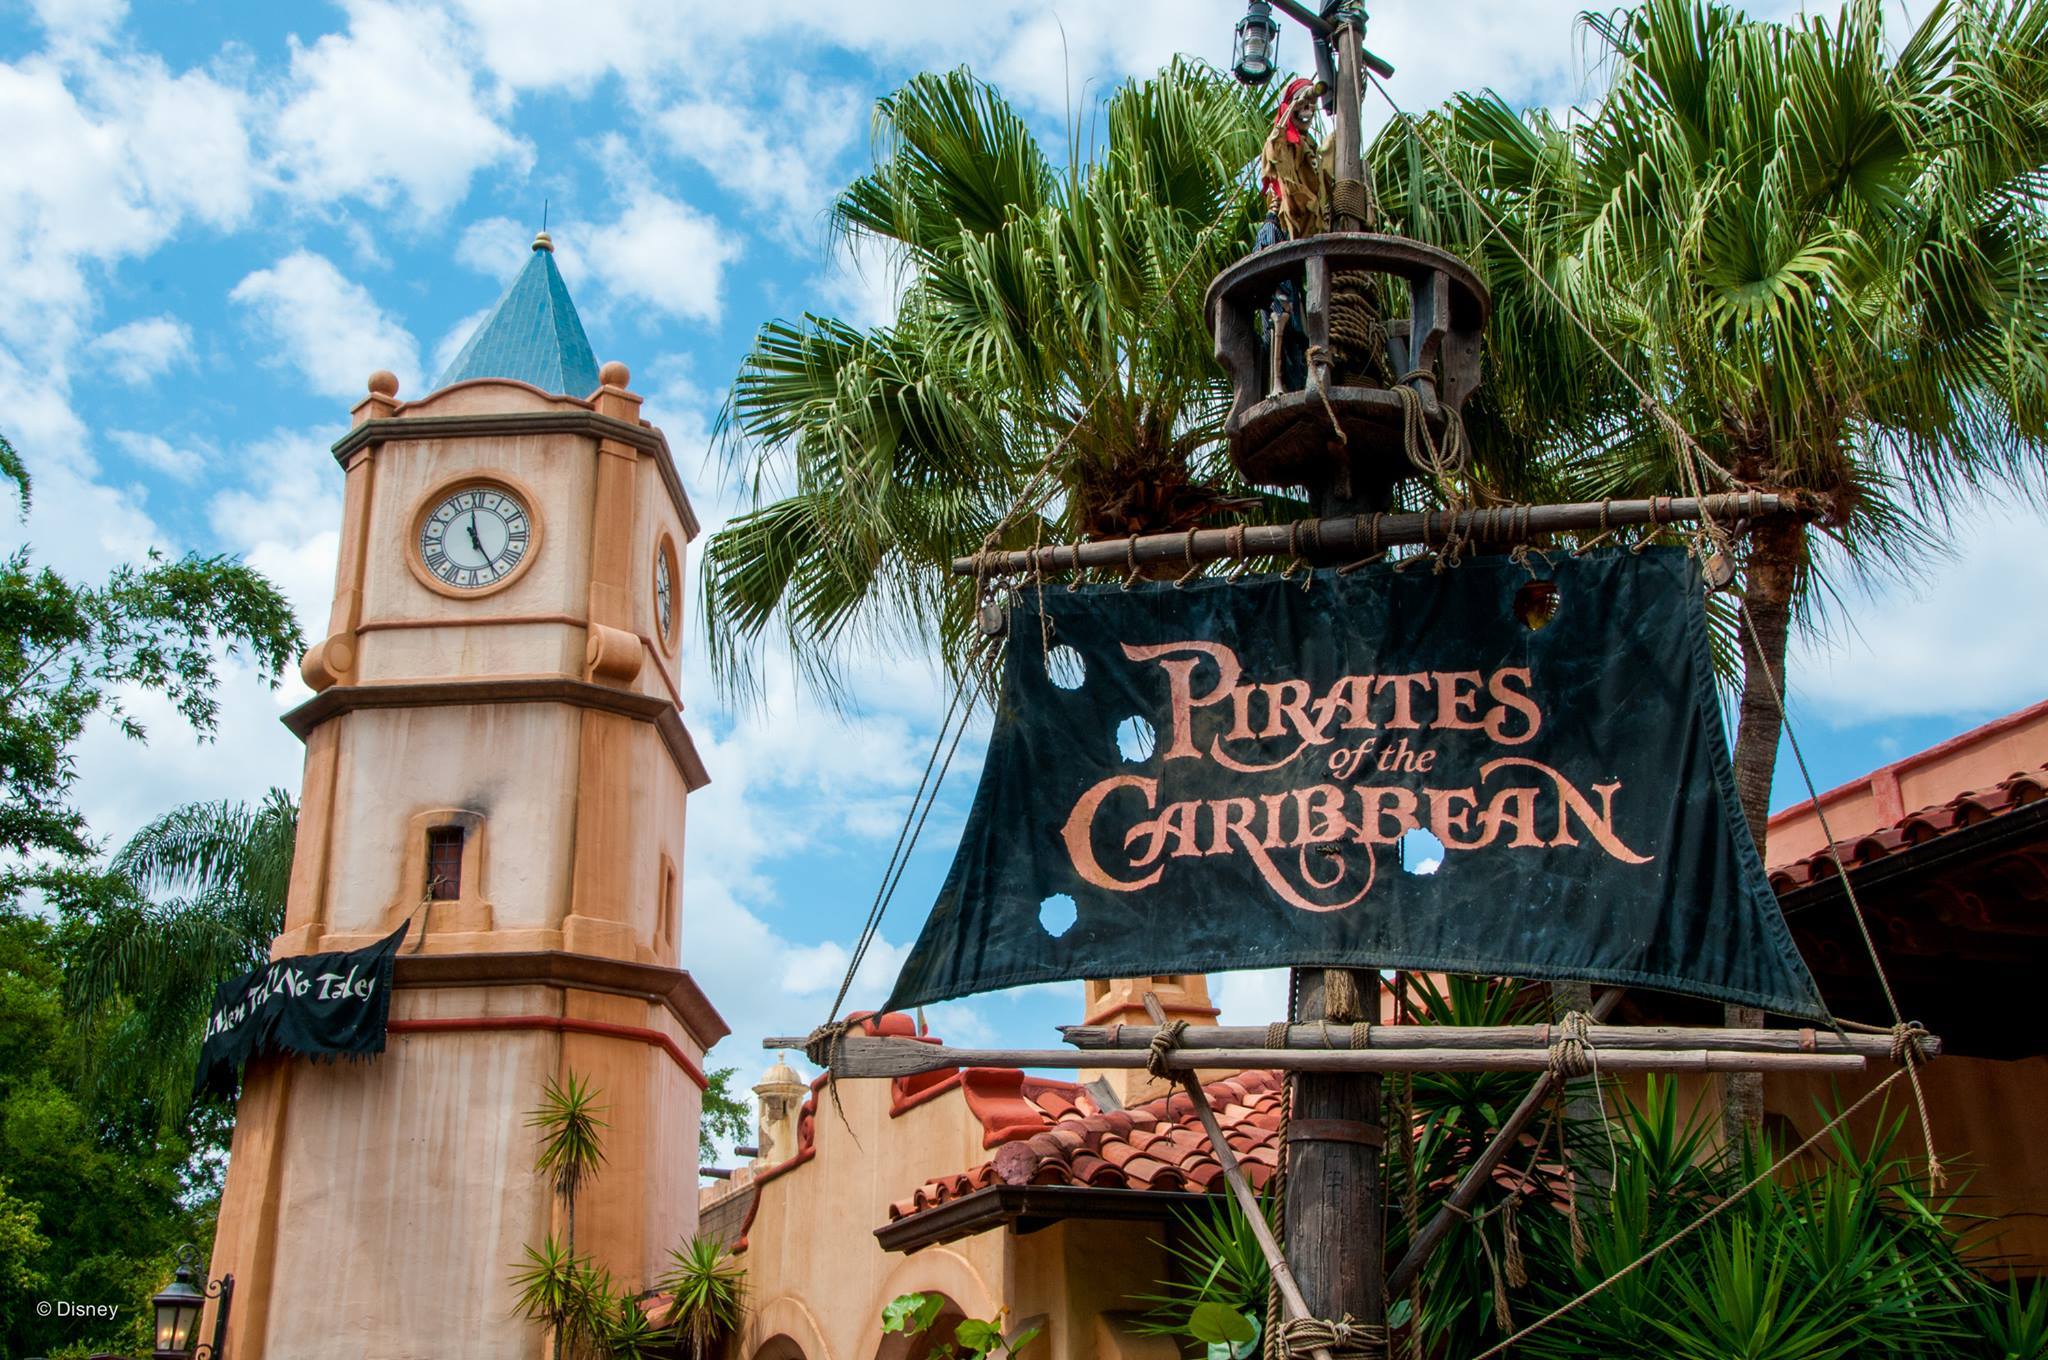 Photo Capture Being Added to Magic Kingdom’s Pirates of the Caribbean Ride Starting June 19th.